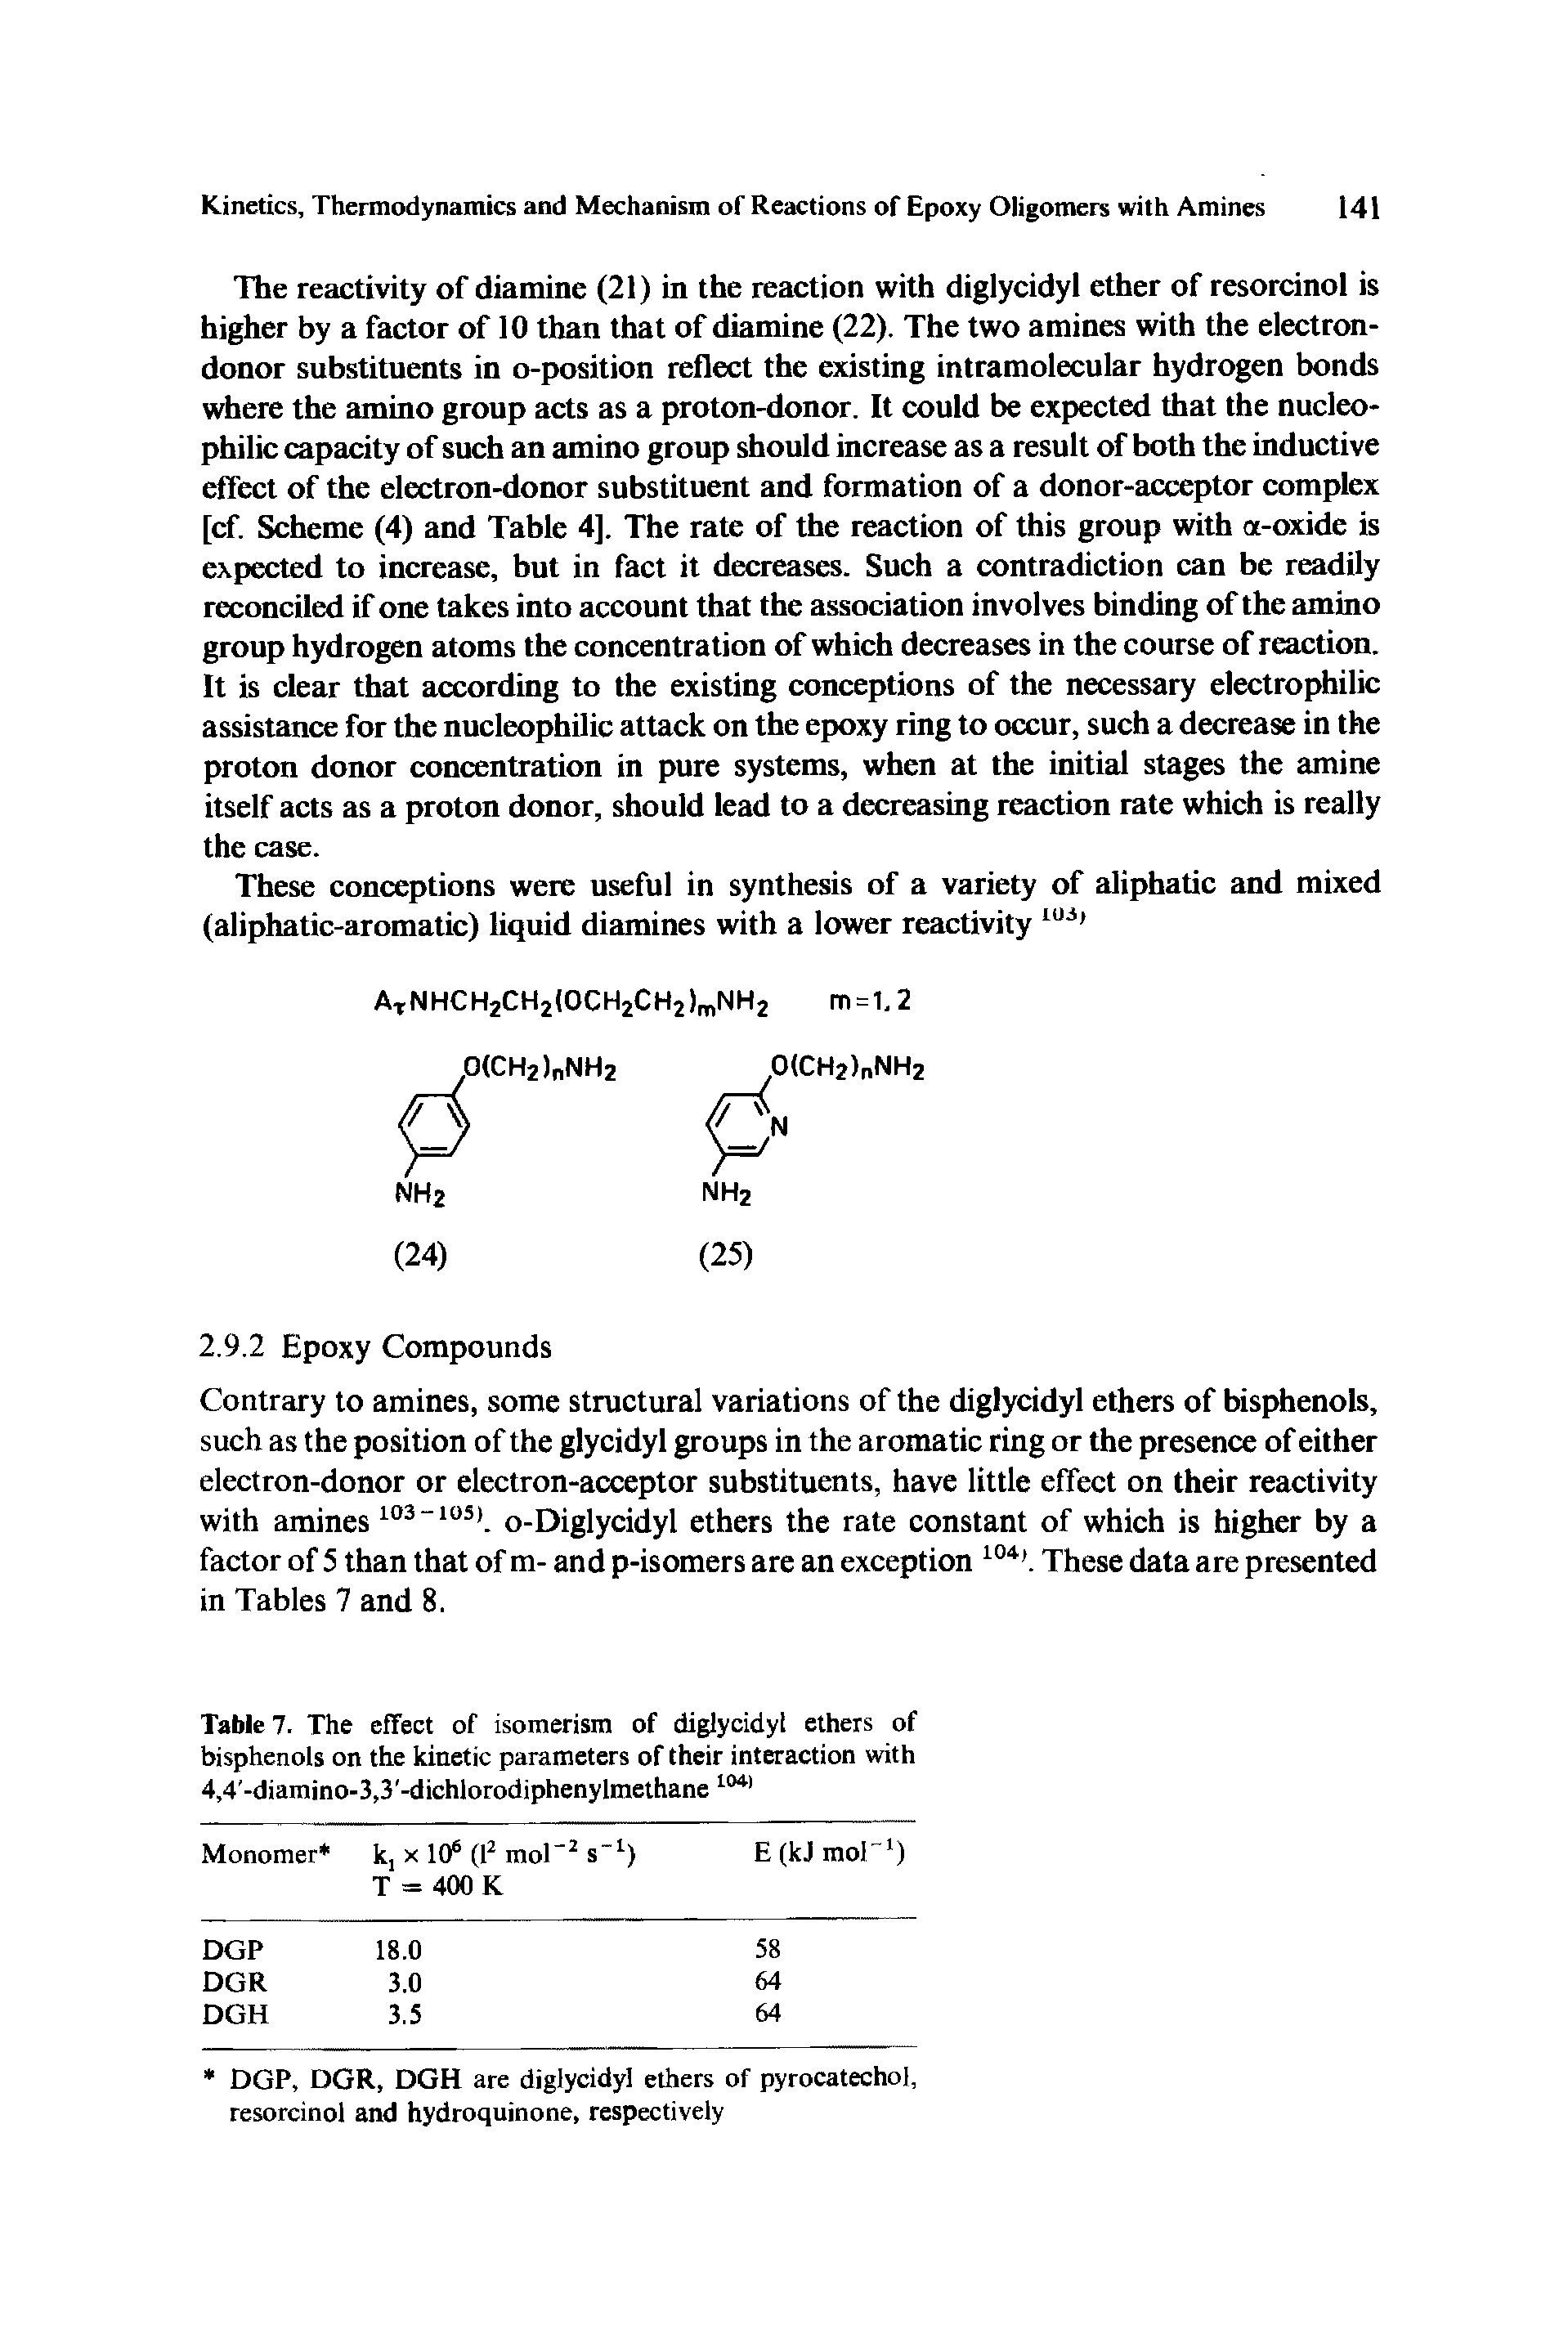 Table 7. The effect of isomerism of diglycidyl ethers of bisphenols on the kinetic parameters of their interaction with 4,4 -diamino-3,3 -dichlorodiphenylmethane 1041...